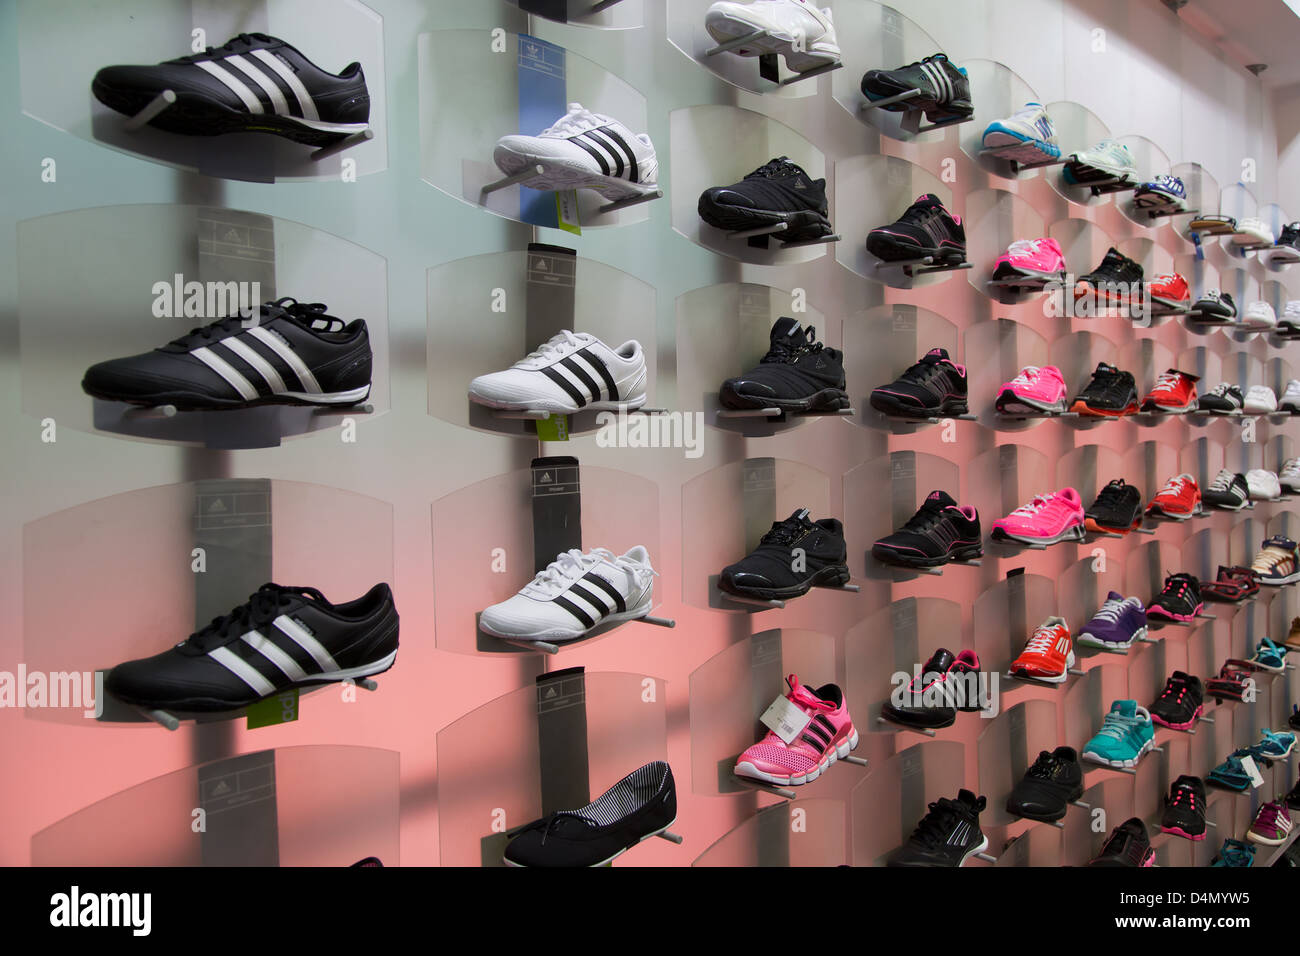 adidas shoes store